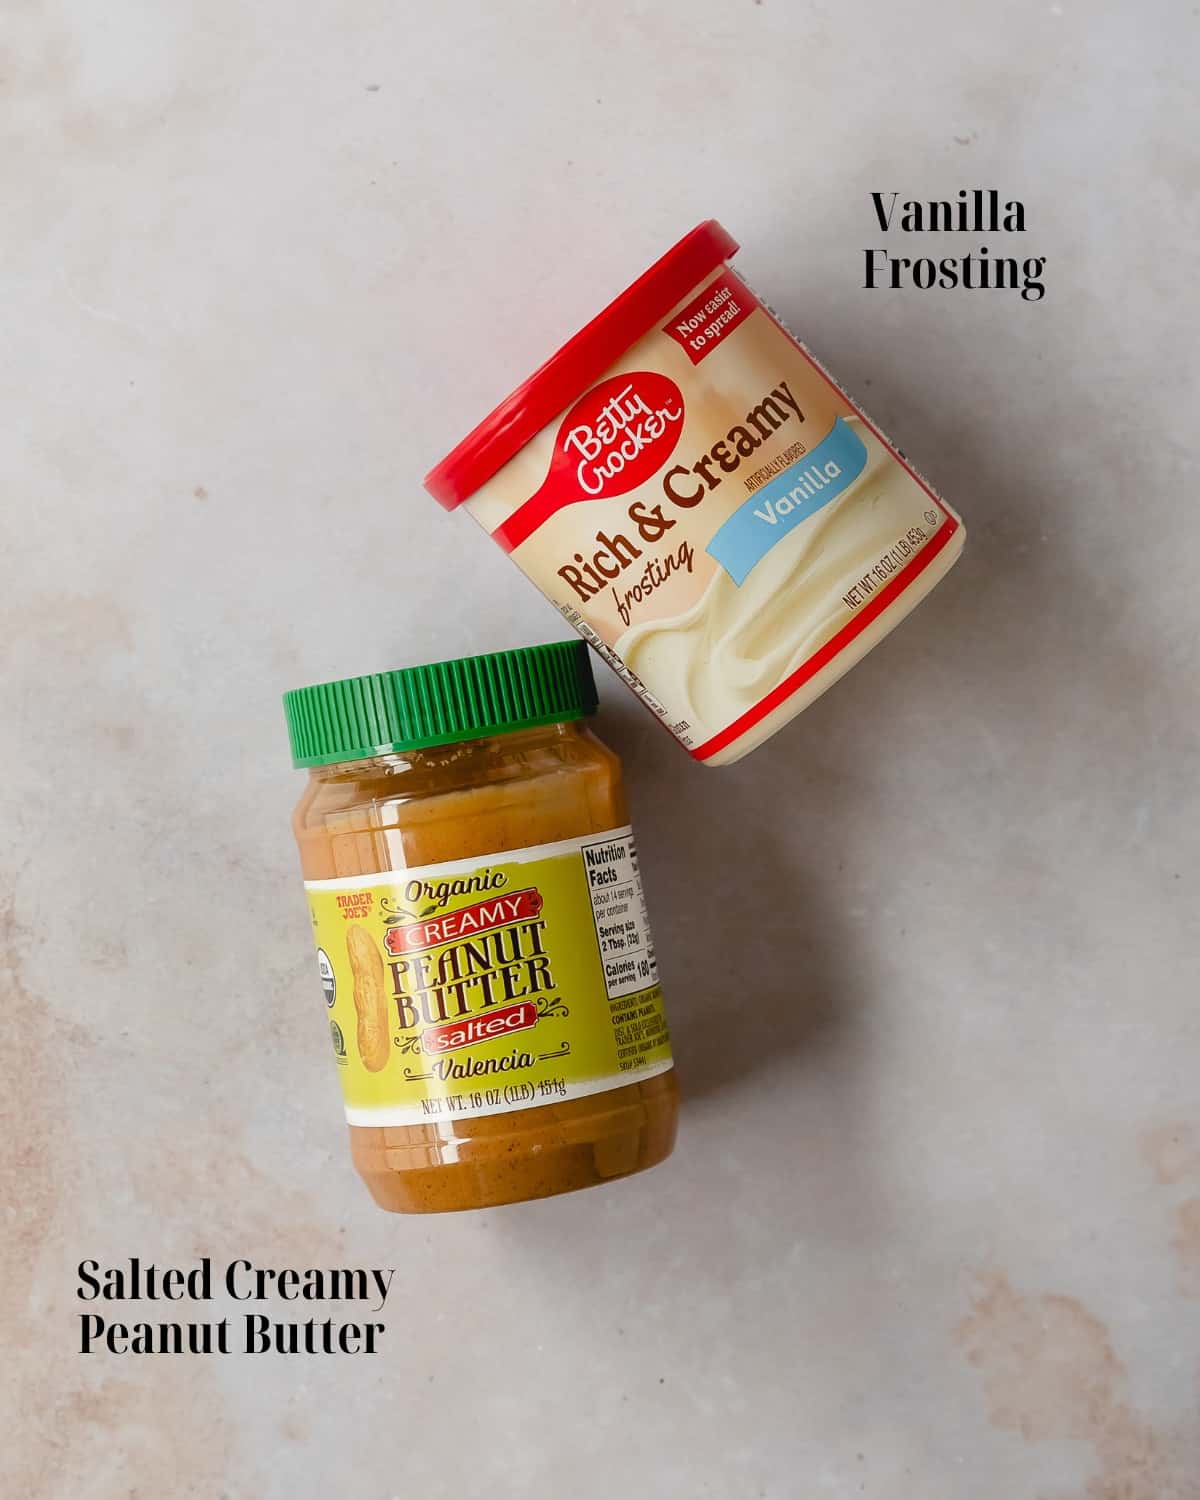 Gather creamy peanut butter and store bought frosting.  